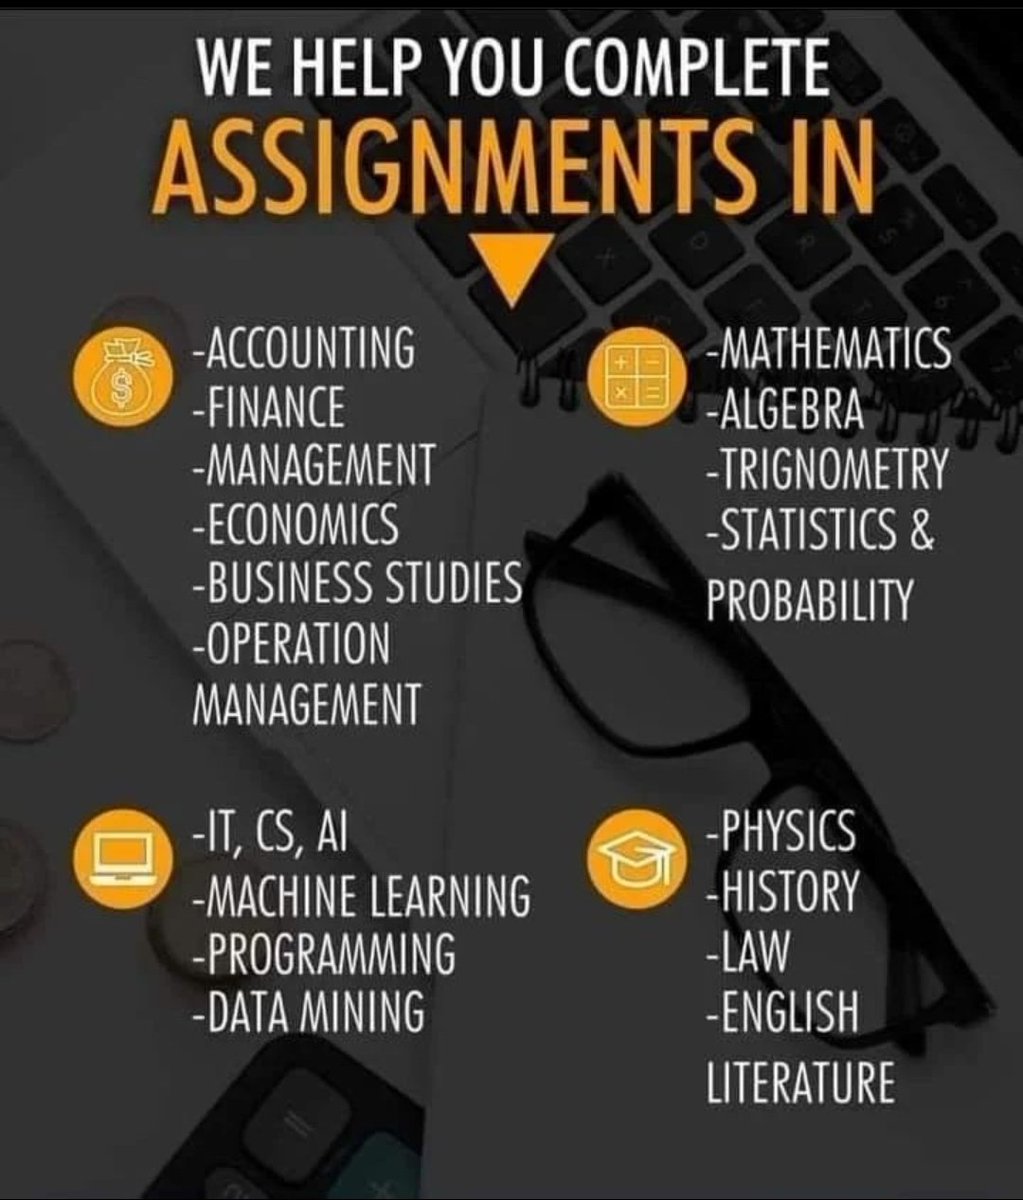 Get all your due assignments handled and delivered within the deadline. Quality guaranteed.
✅Write paper
✅Exam
✅Math
#ResearchPapers
#Assignmentdue
#Homework
#thesiswriting
#essaywriting 

#PV #Asu #Shsu #HBCU #Ncat #Southernuniversity #Famu #Gramfam #essaypay #GrandeFratello